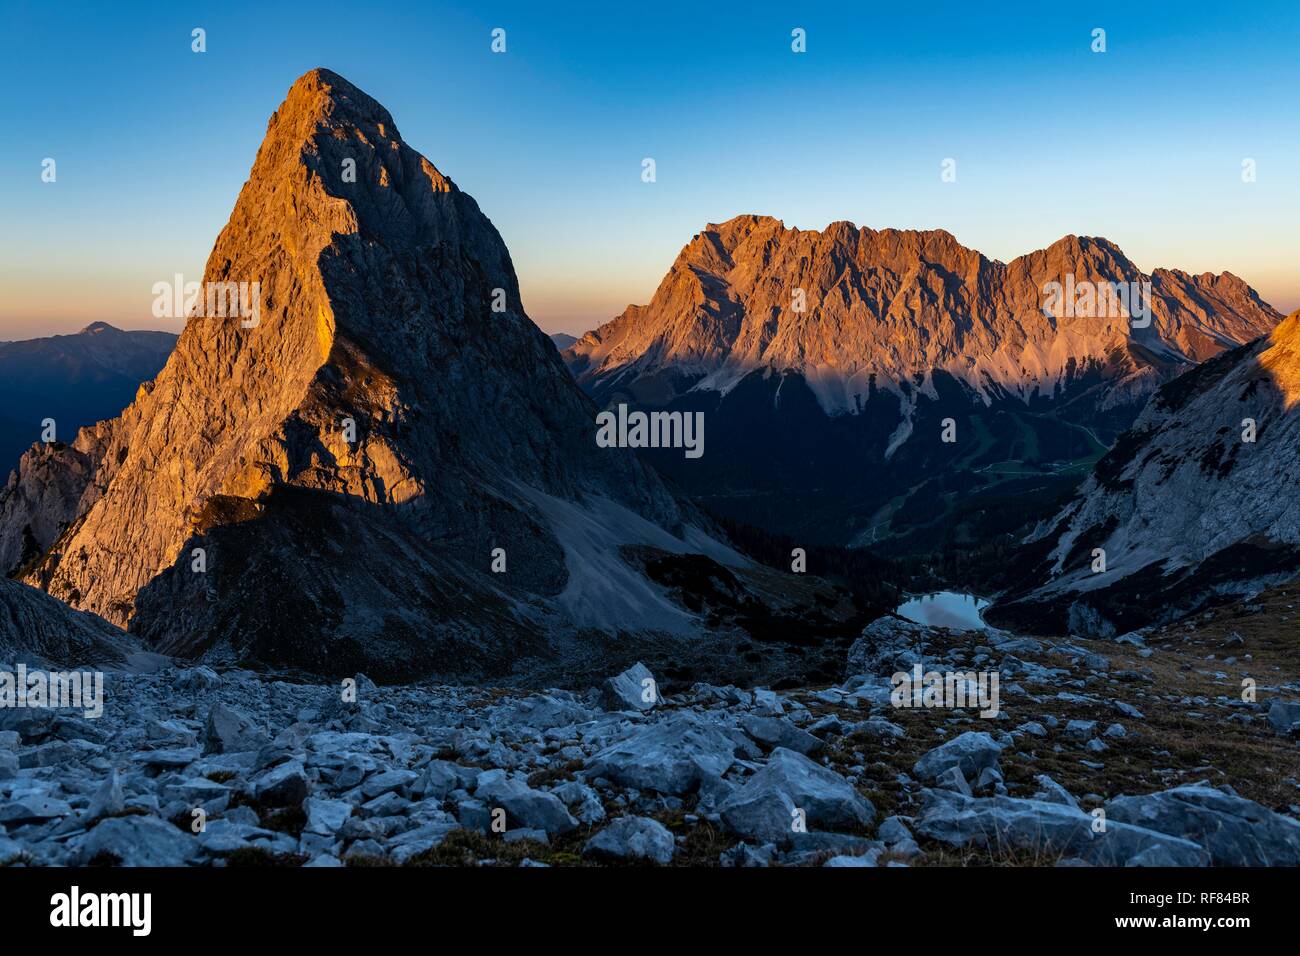 Summit of the Sonnenspitze with Zugspitze in the background at evening light, Ehrwald, Außerfern, Tyrol, Austria Stock Photo